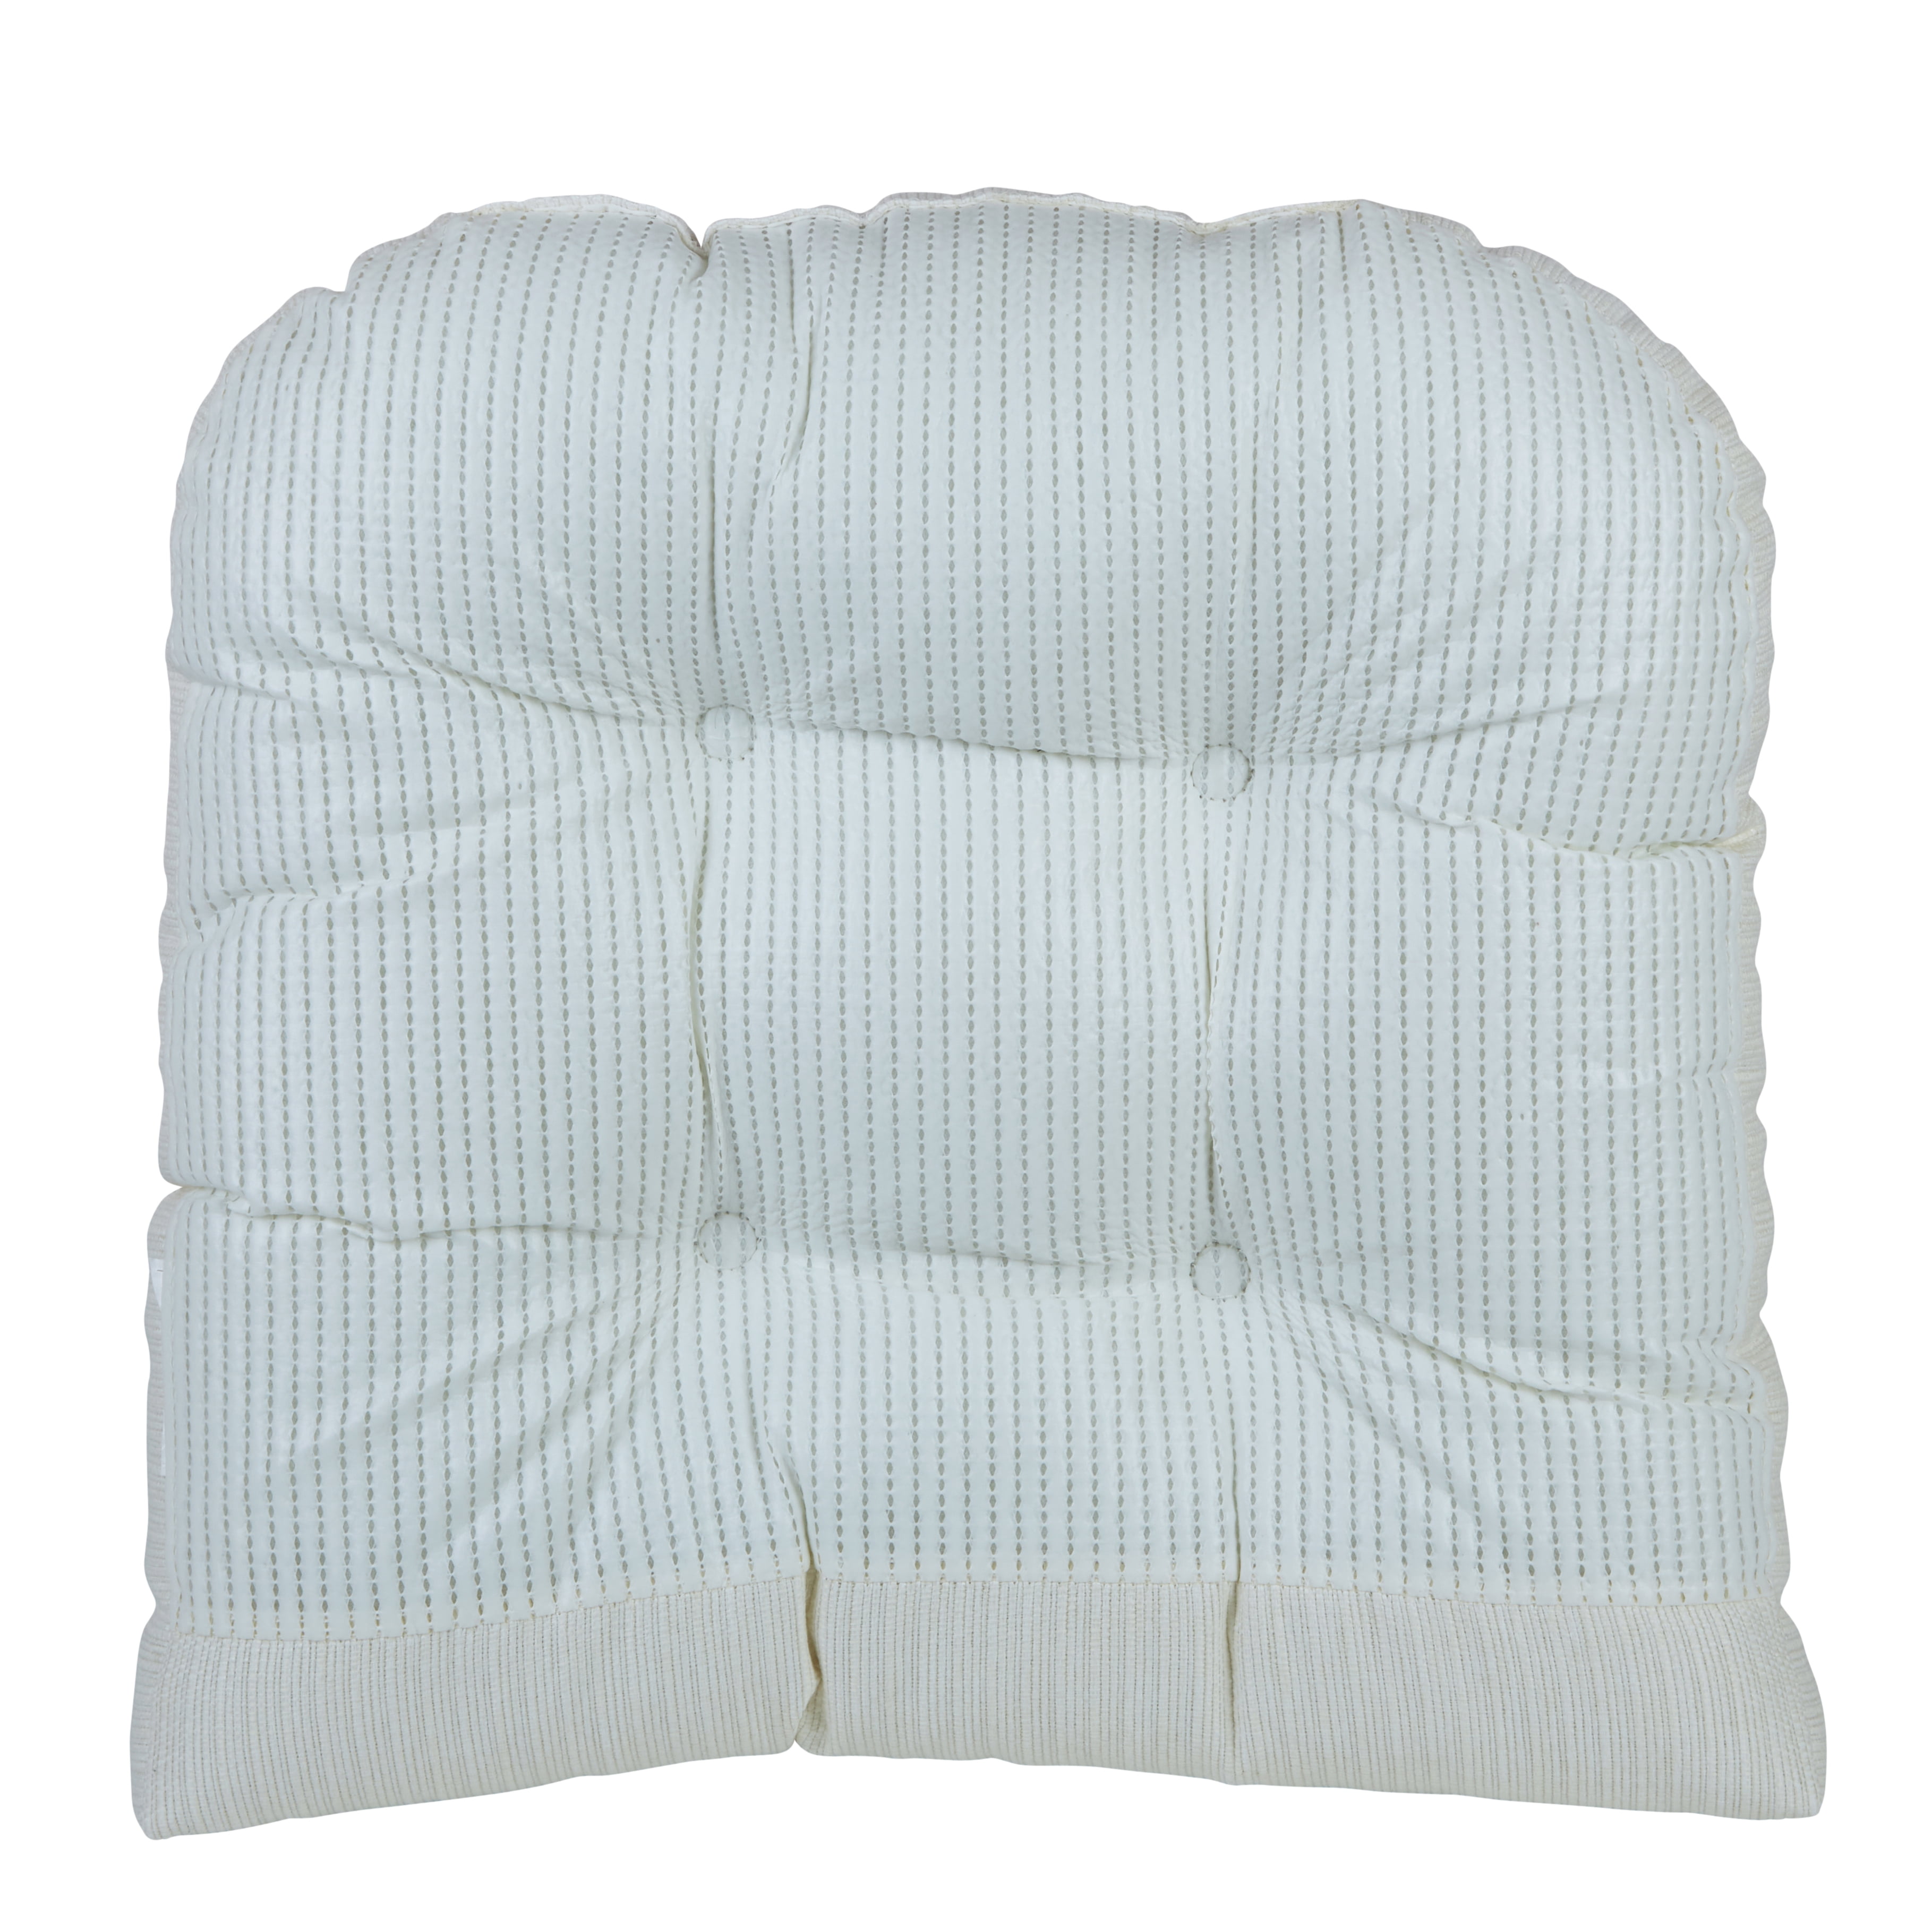 CAPPS Pelvic and Pudendal Chair Cushion